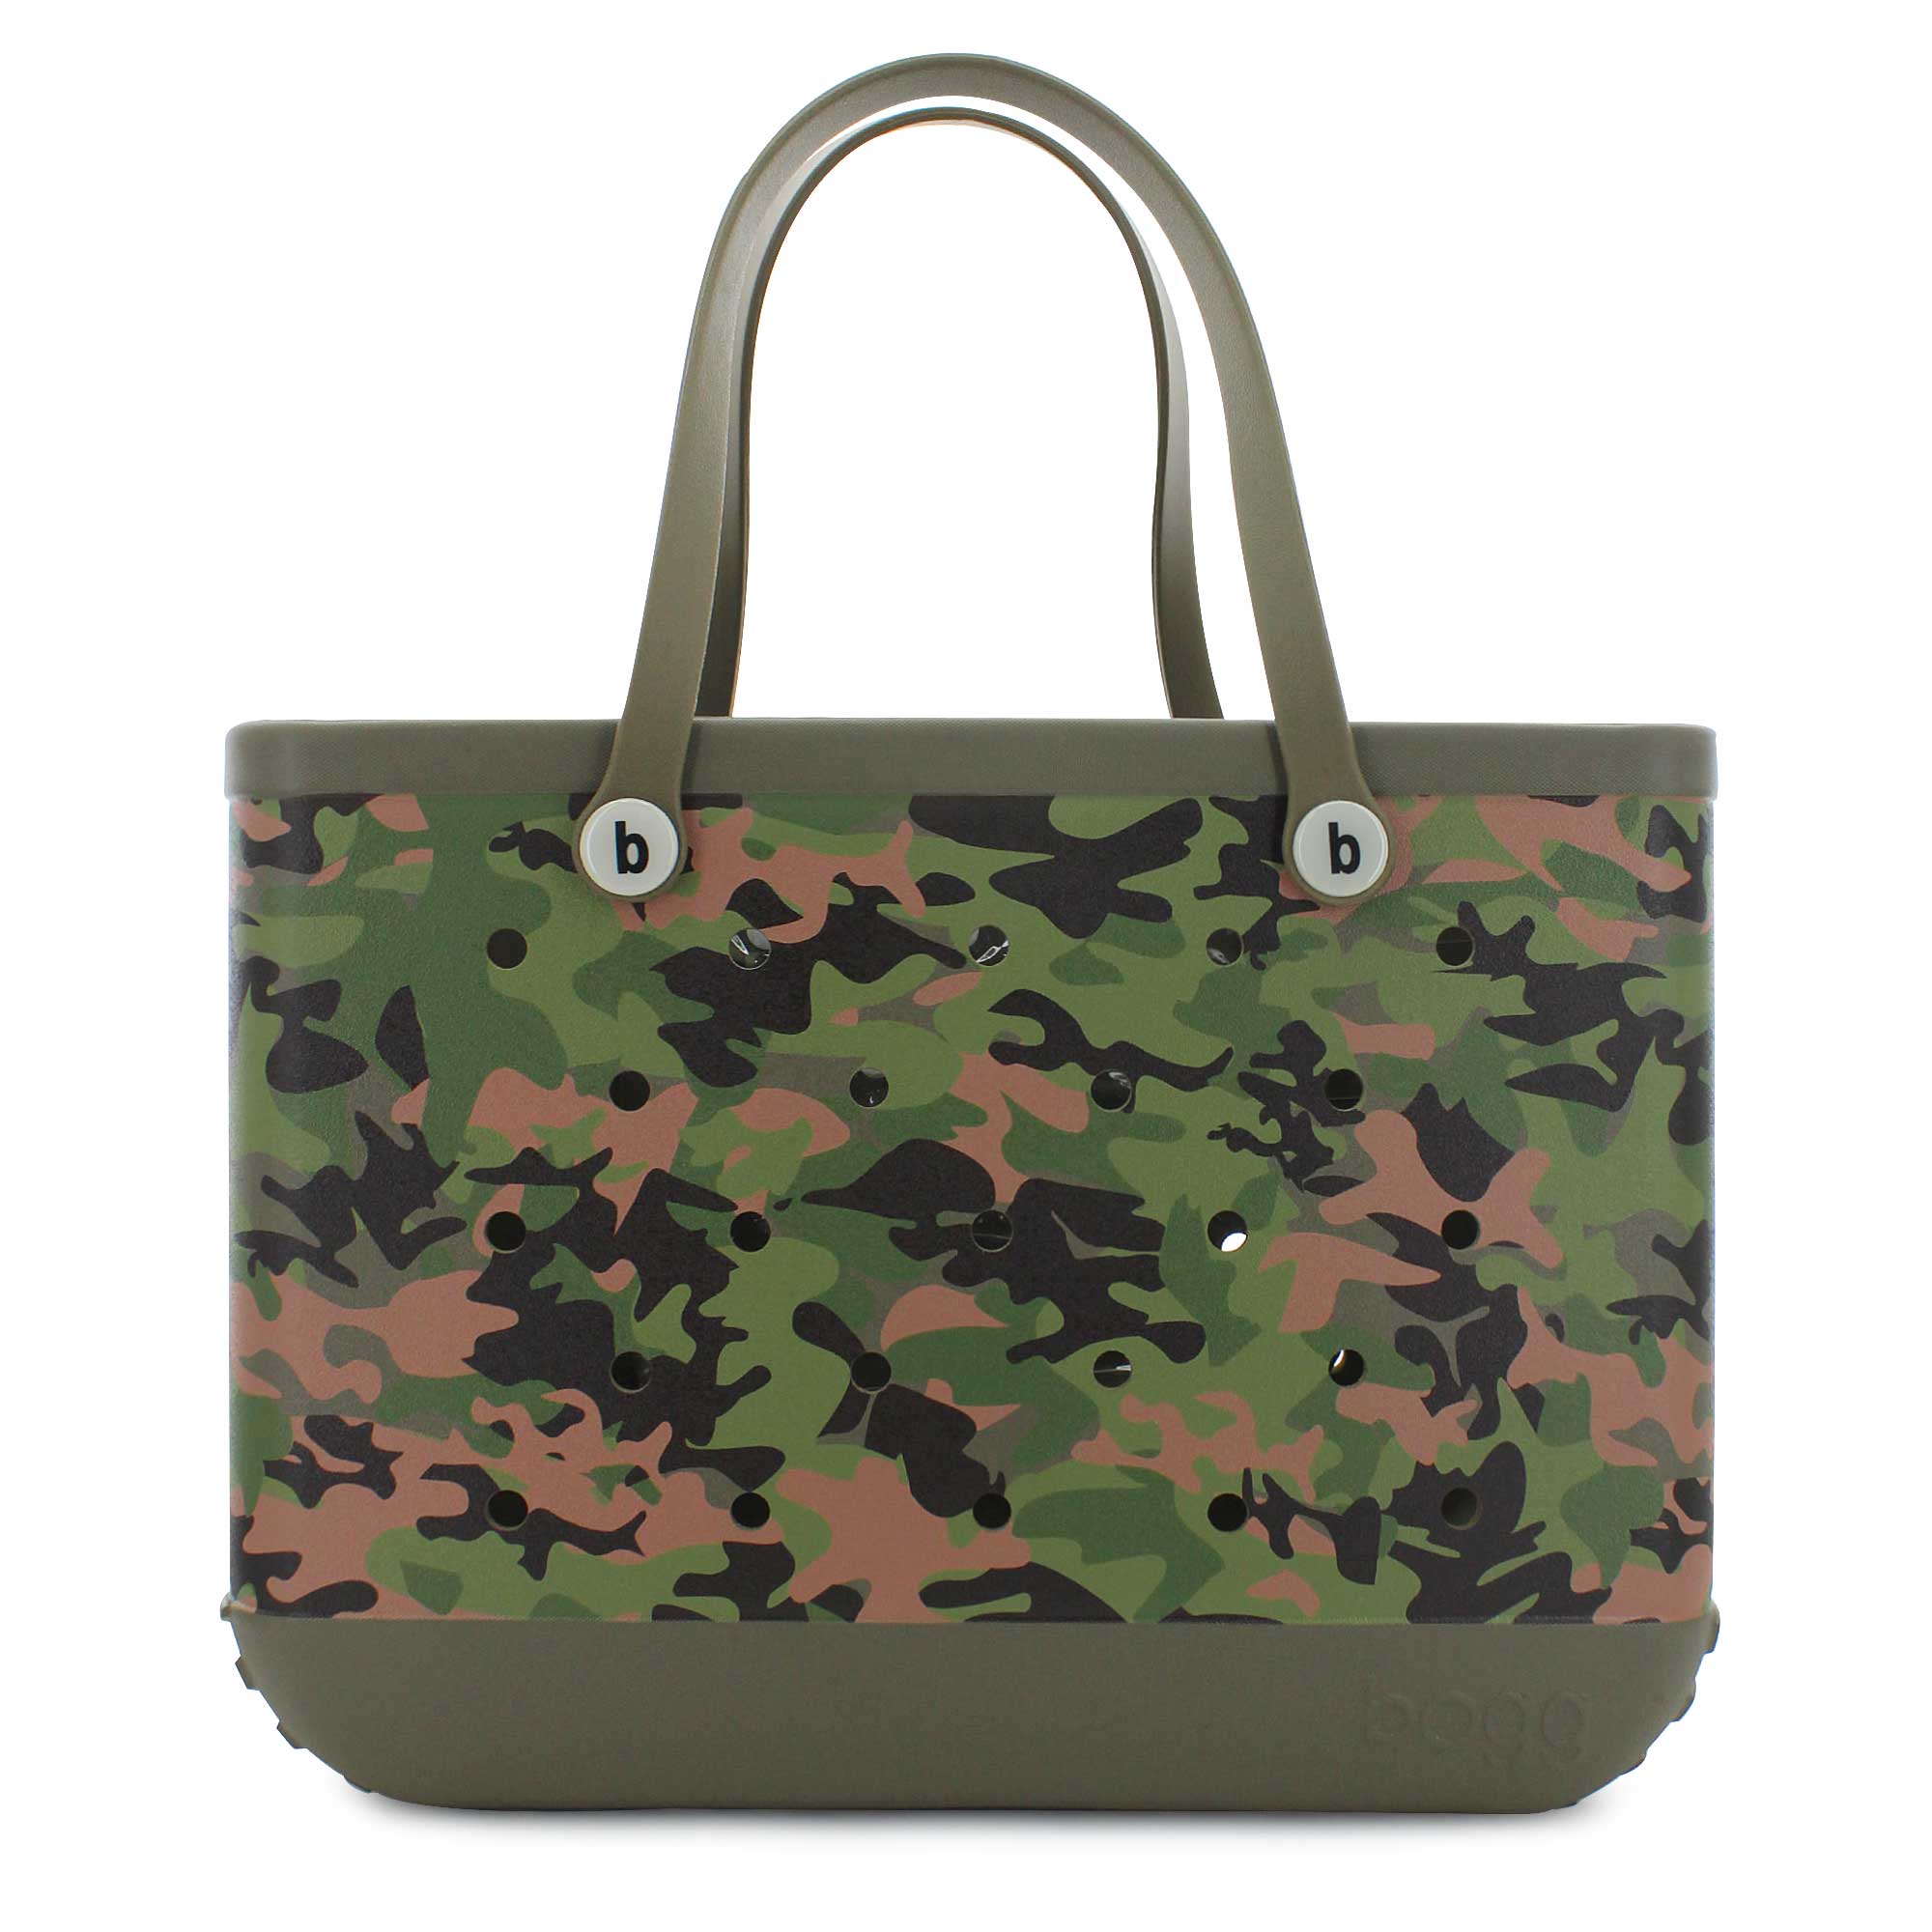 The Village Shoppe - BOGG BAG PRE-ORDER— We have a shipment on the